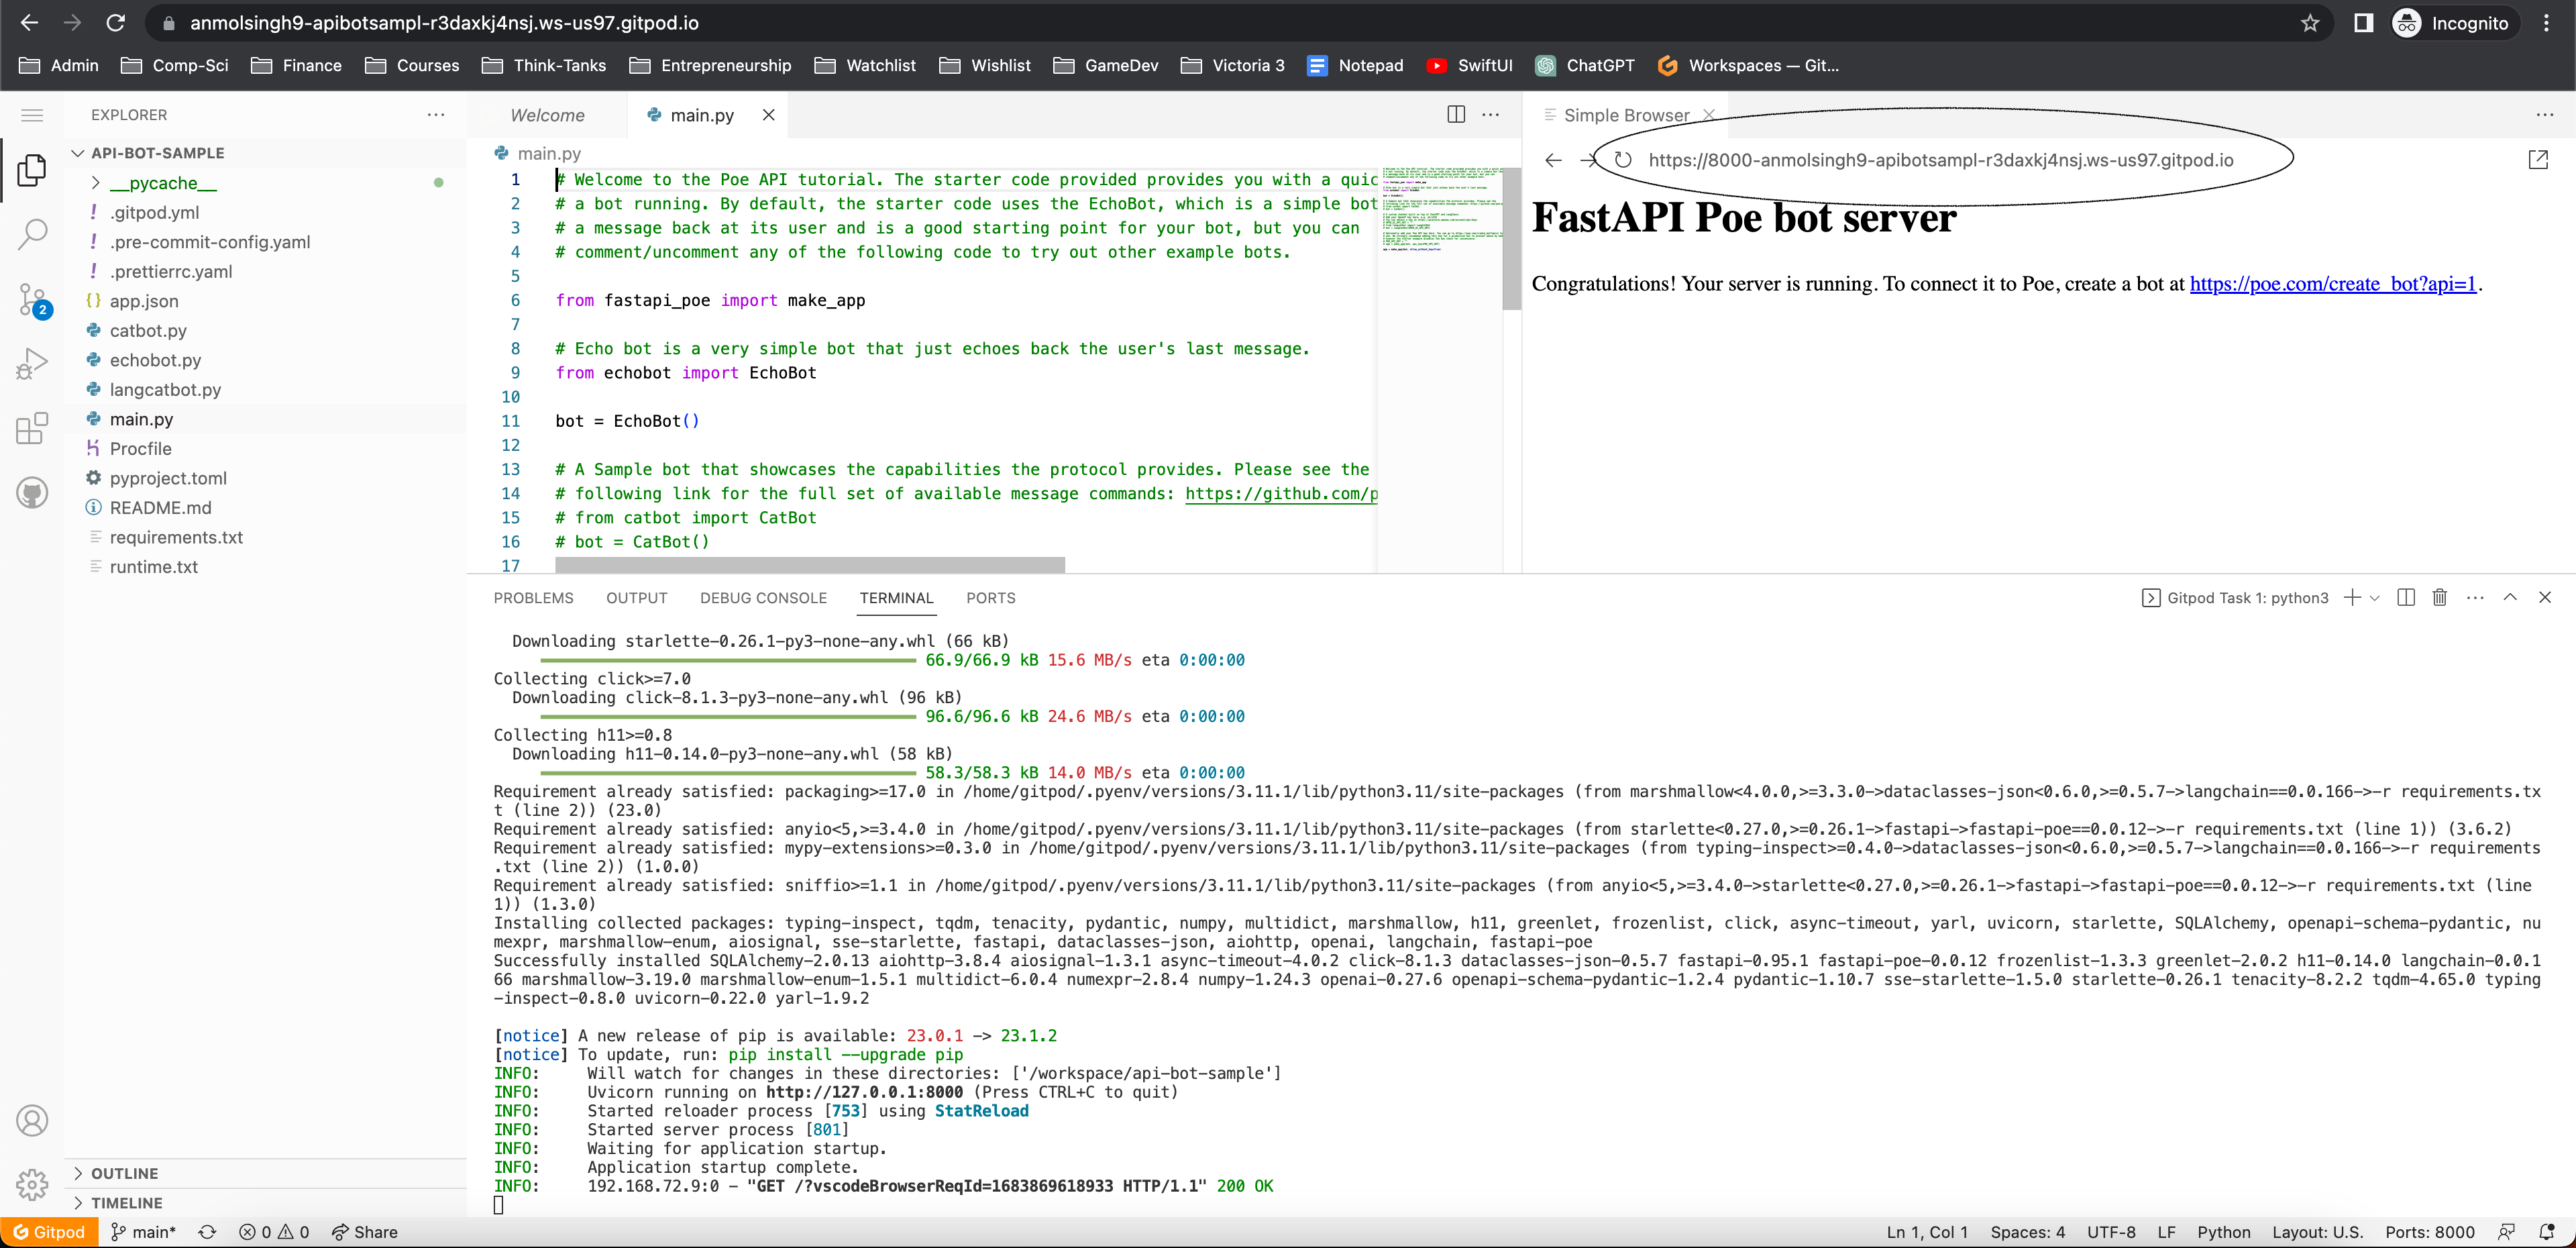 Screenshot of a Gitpod page with the URL for the server circled.